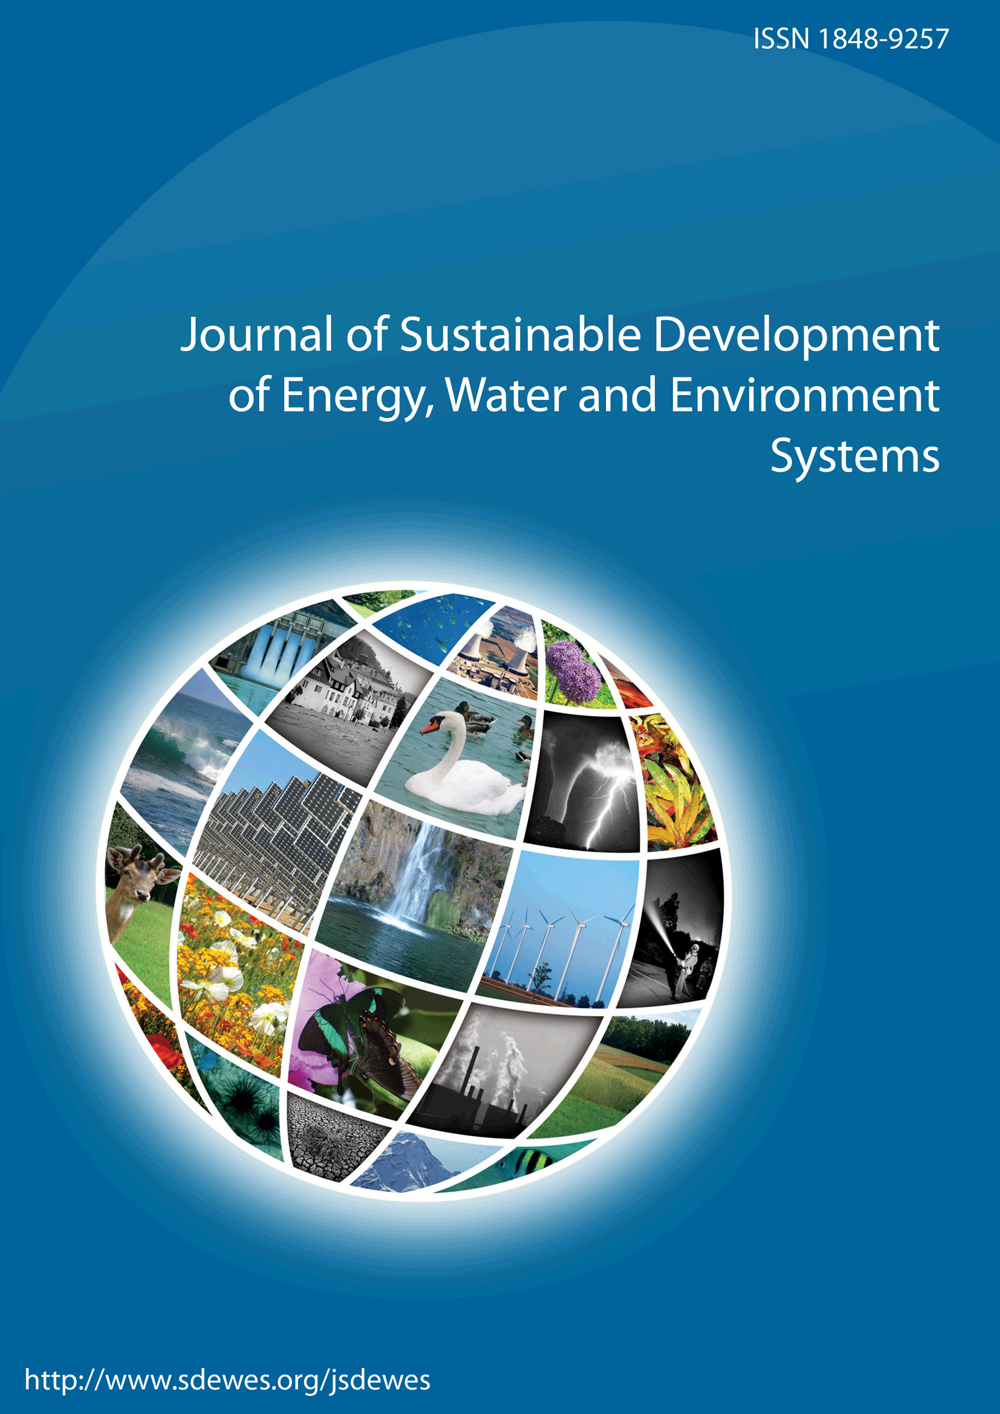 Journal of Sustainable Development of Energy, Water and Environment Systems